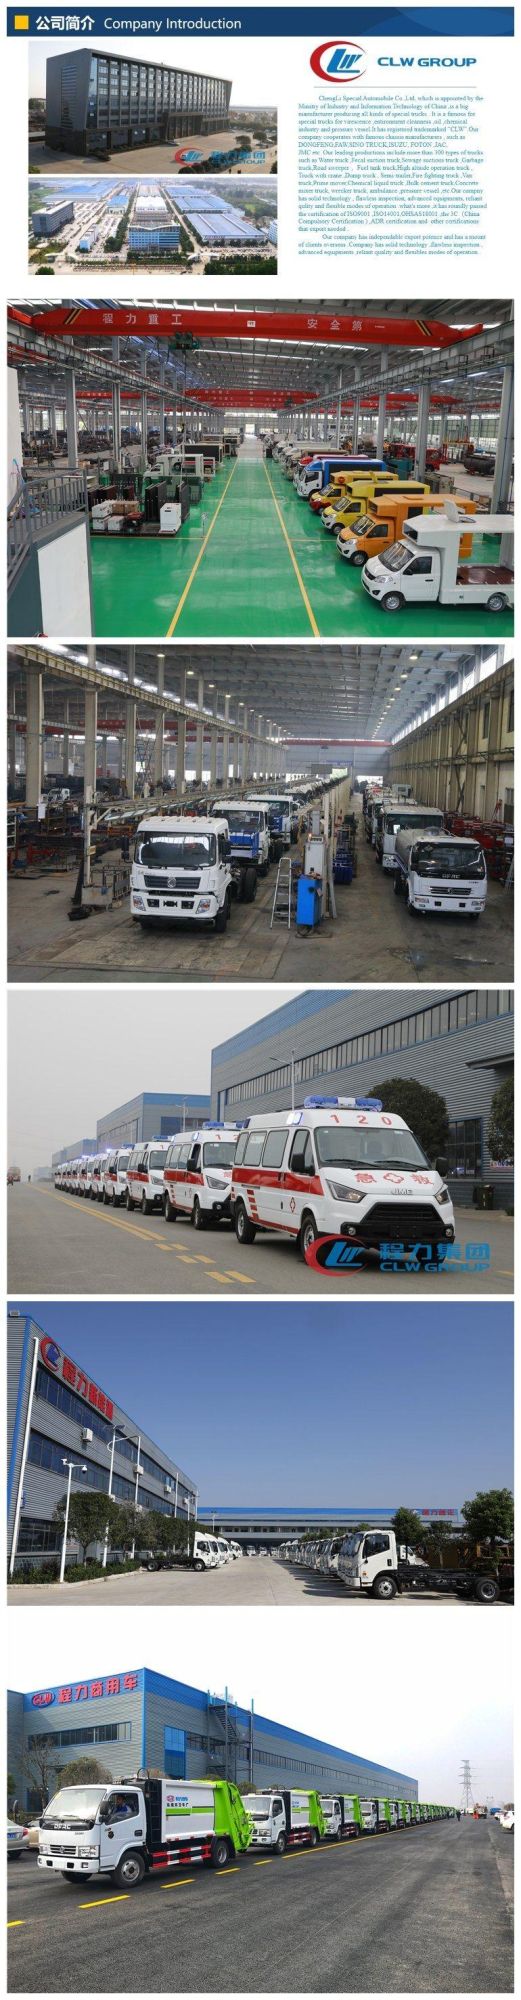 Shacman 6X4chassis 16 Ton Water Tanker Fire Truck for Emergency Rescue Work, Fire-Fighting Truck for Sales